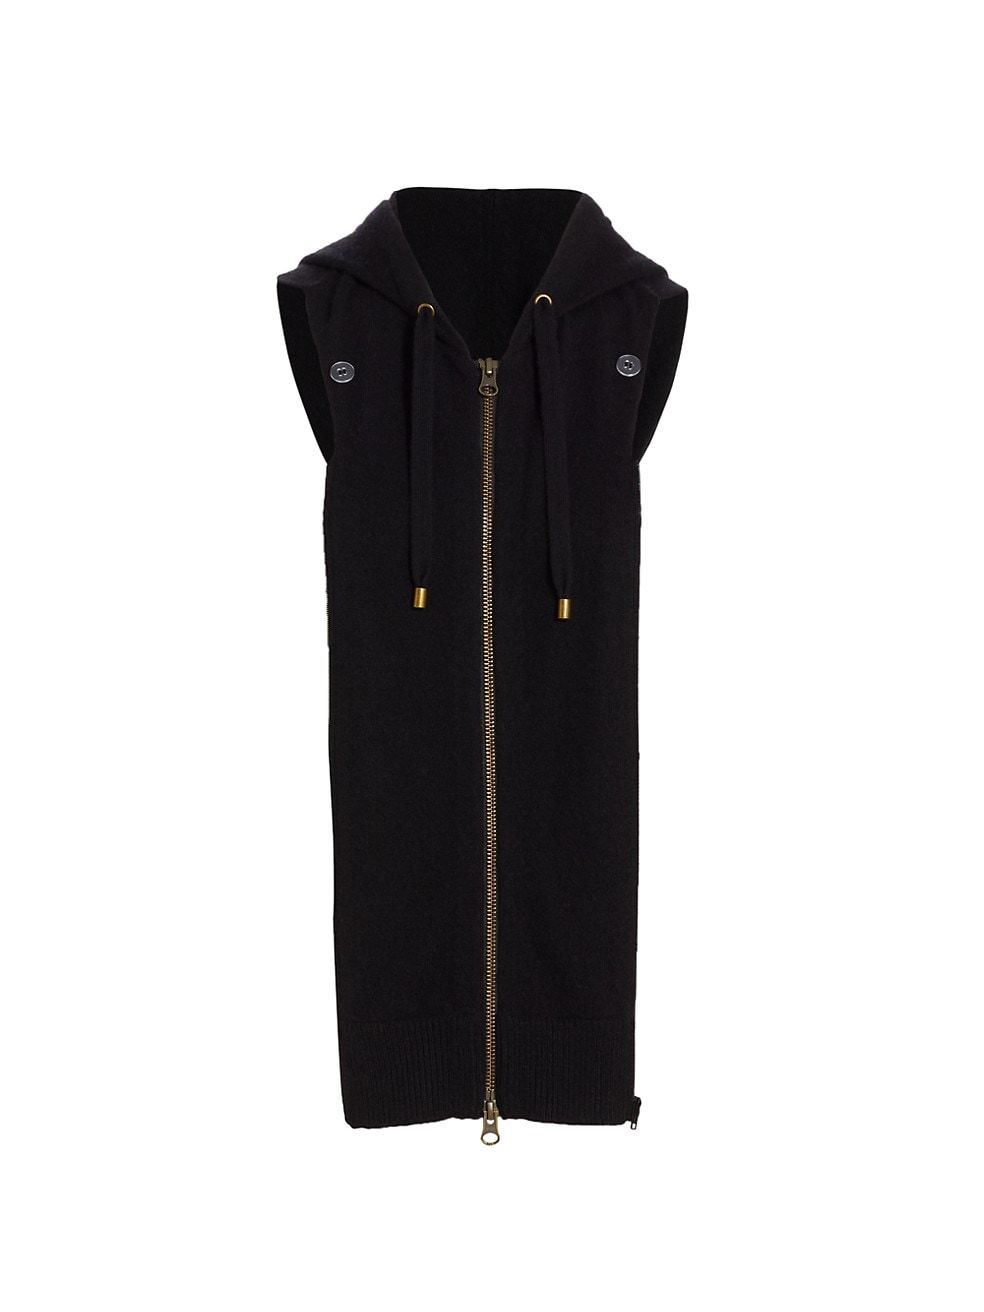 Hooded Cashmere Dickie | Saks Fifth Avenue